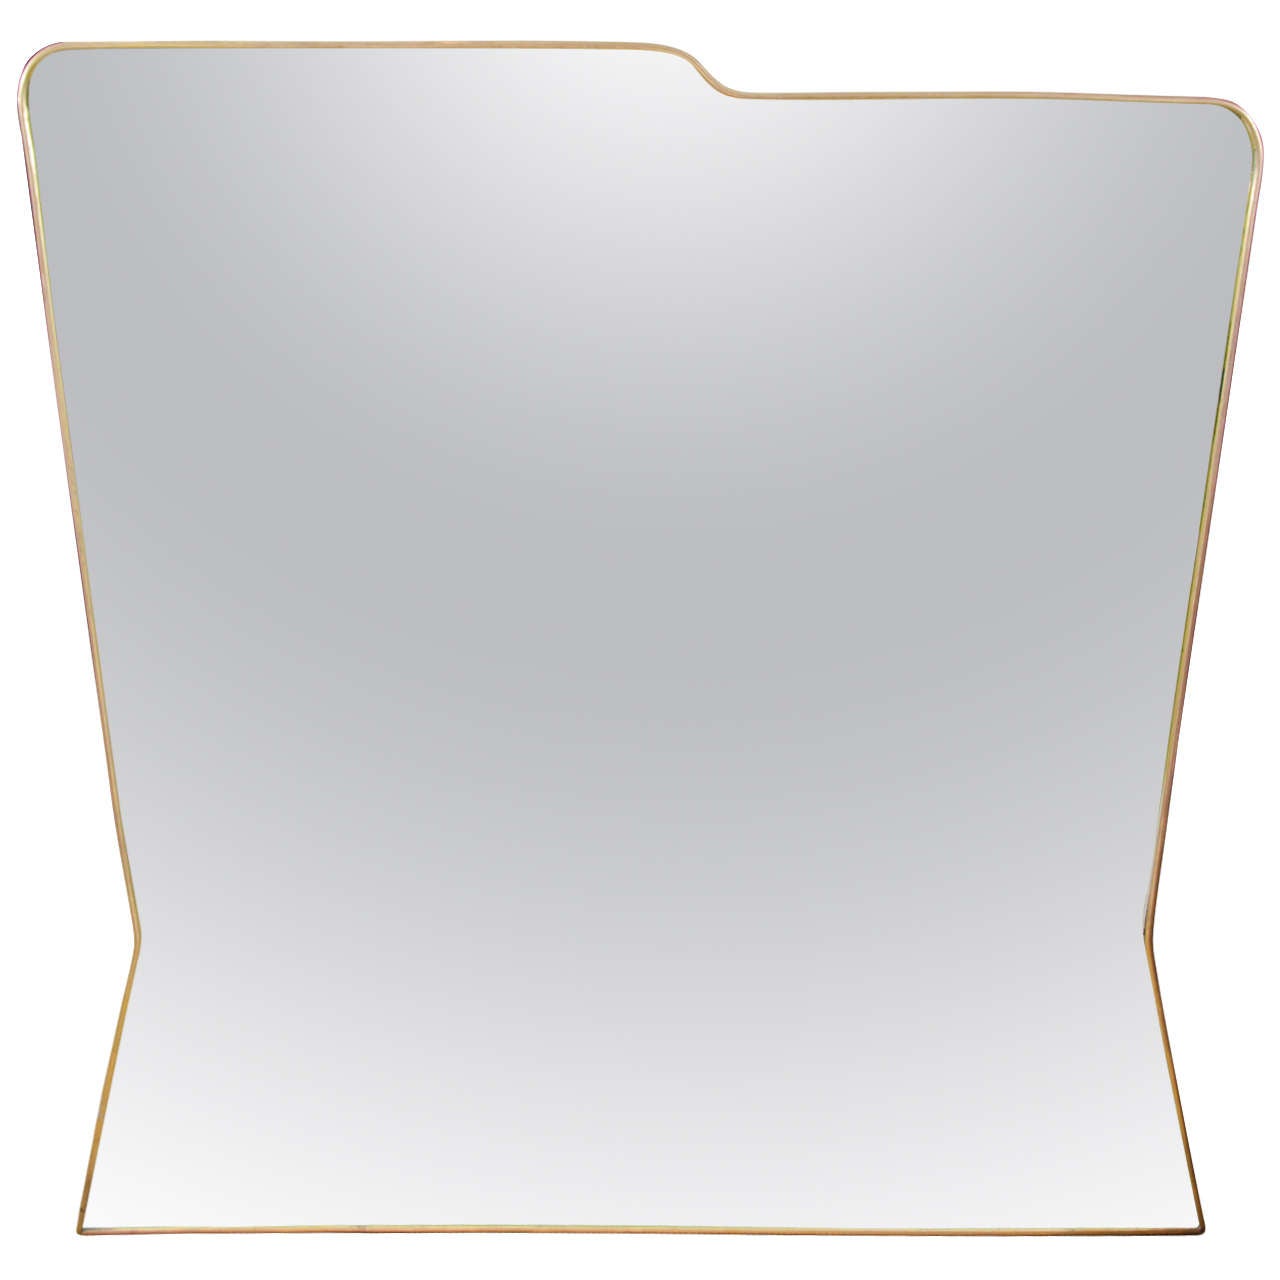 Made to Order Italian Modernist Style Brass Framed Mirror For Sale